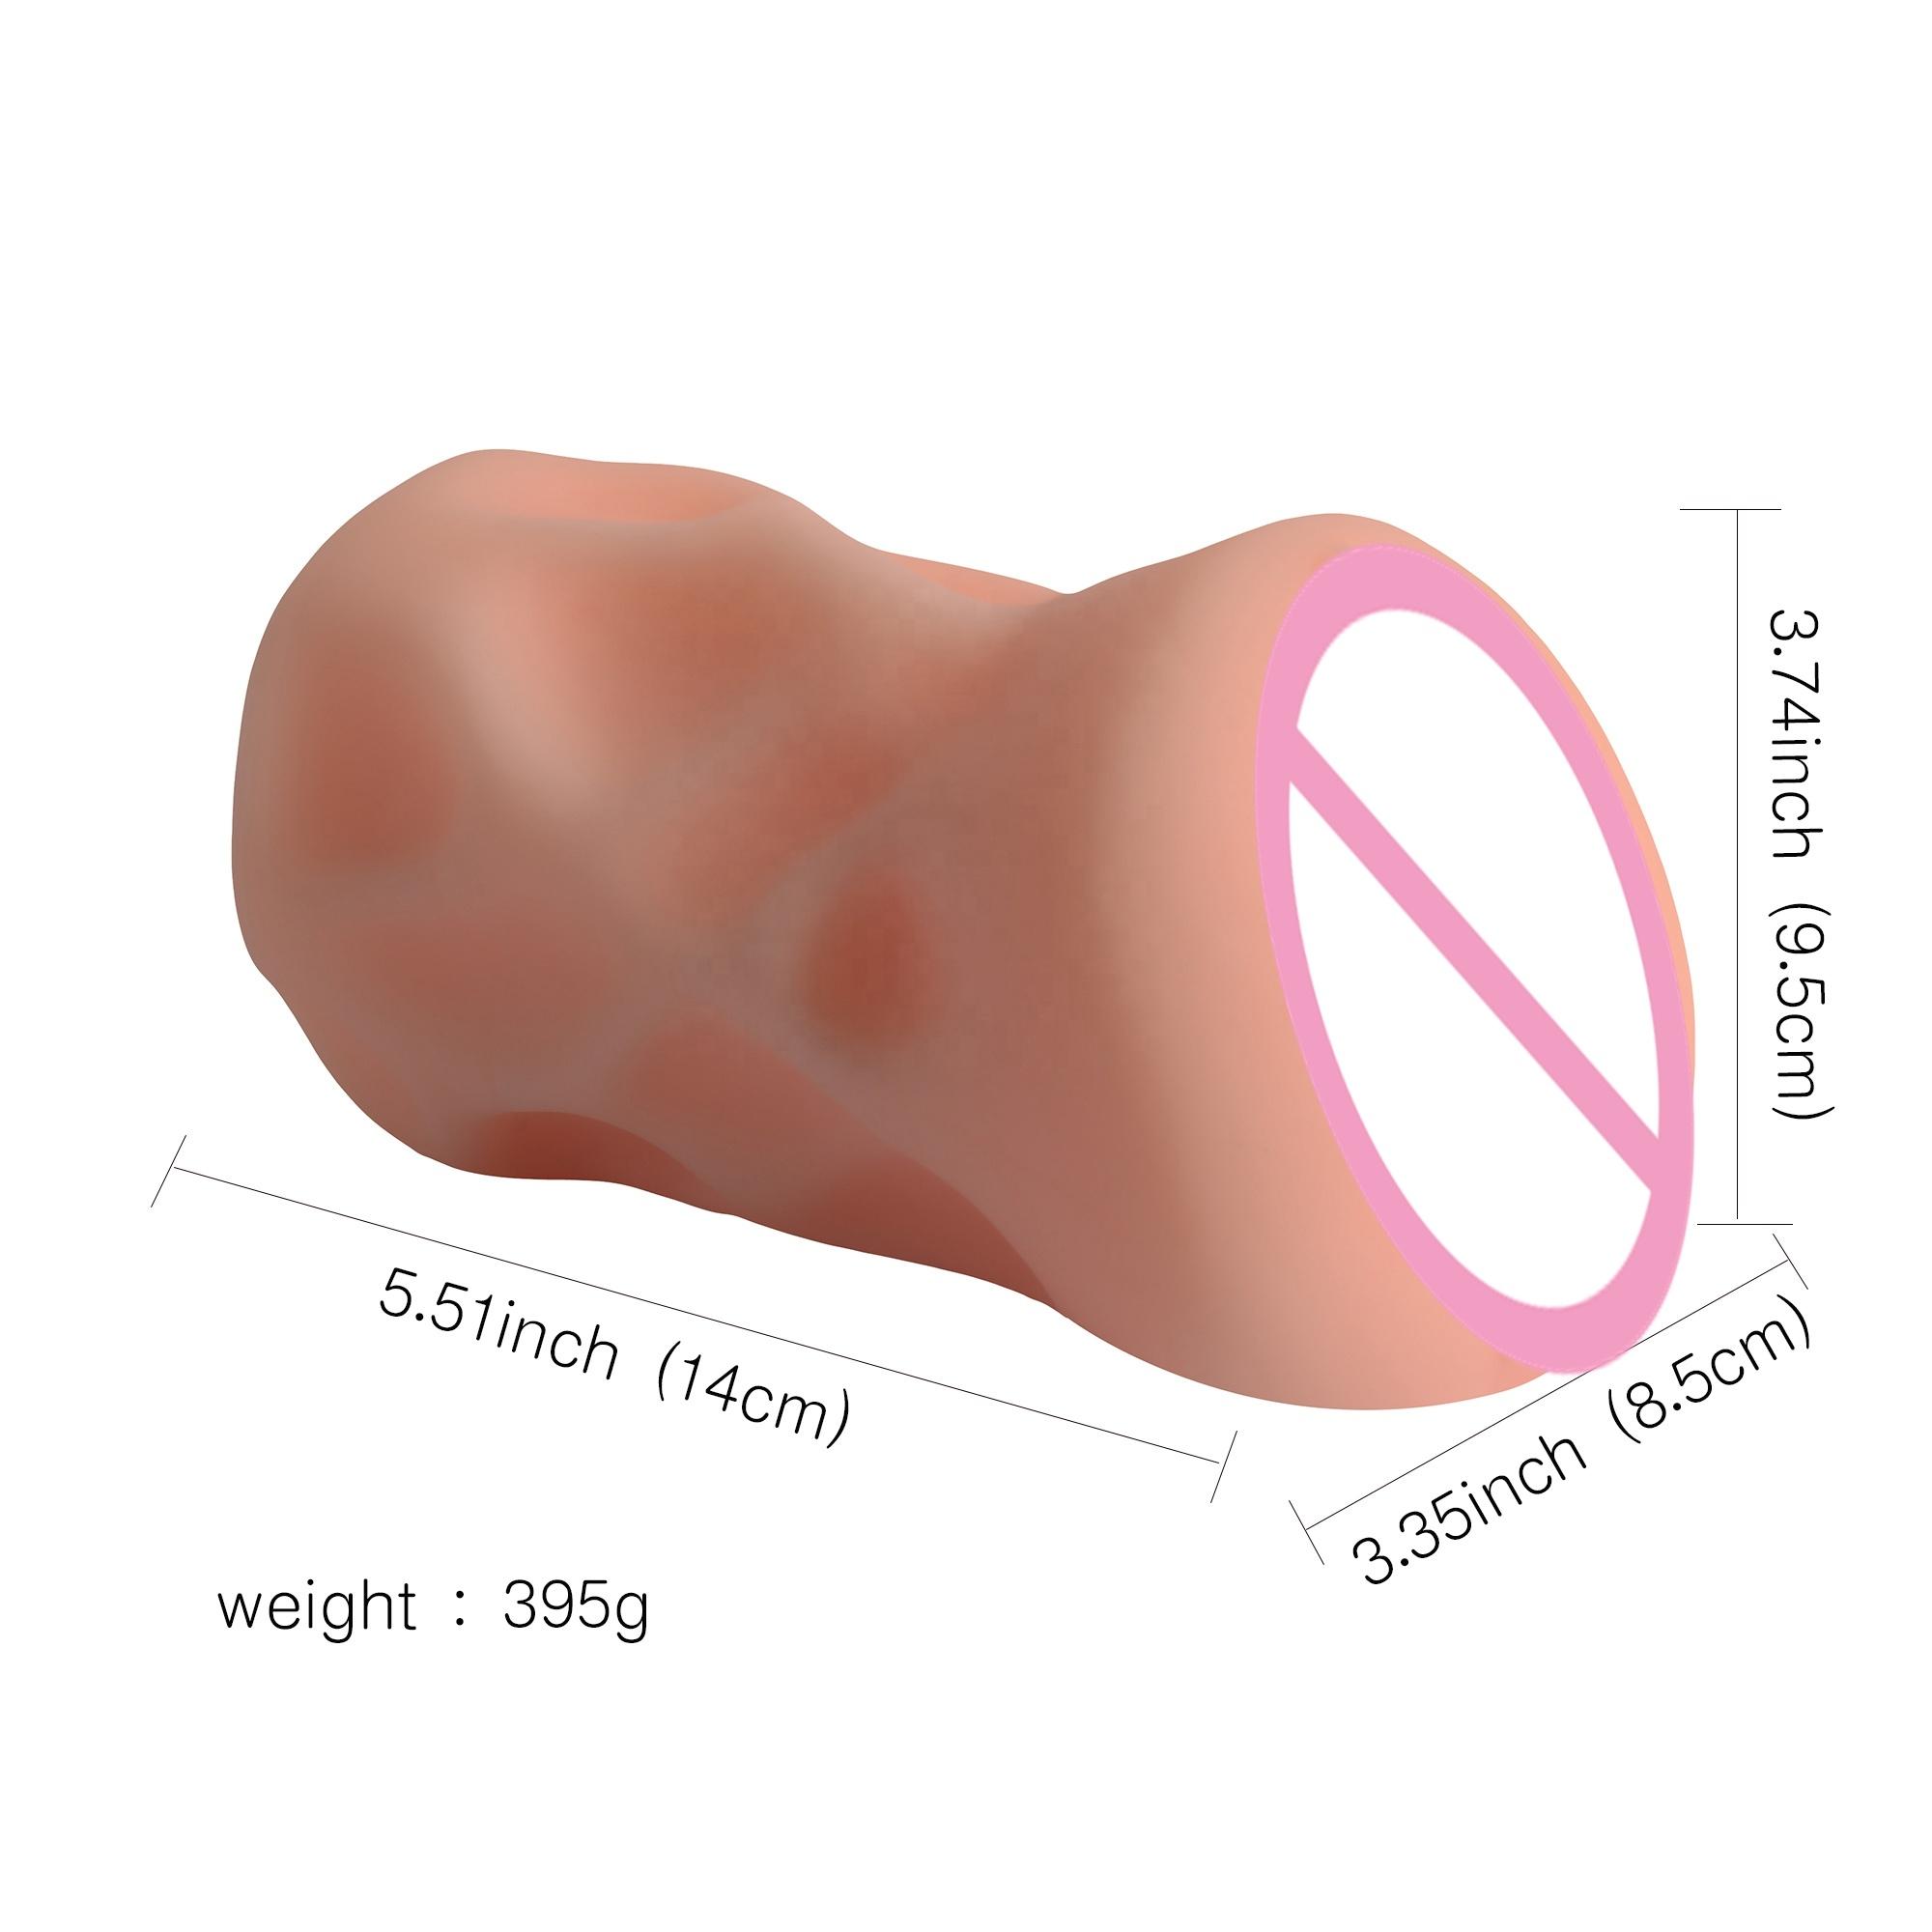  Upgrade Soft Medical Dual Layer Mini Vaginal Masturbation Stroker Realistic Portable Sexy Big Ass Sex Toy Device For Men